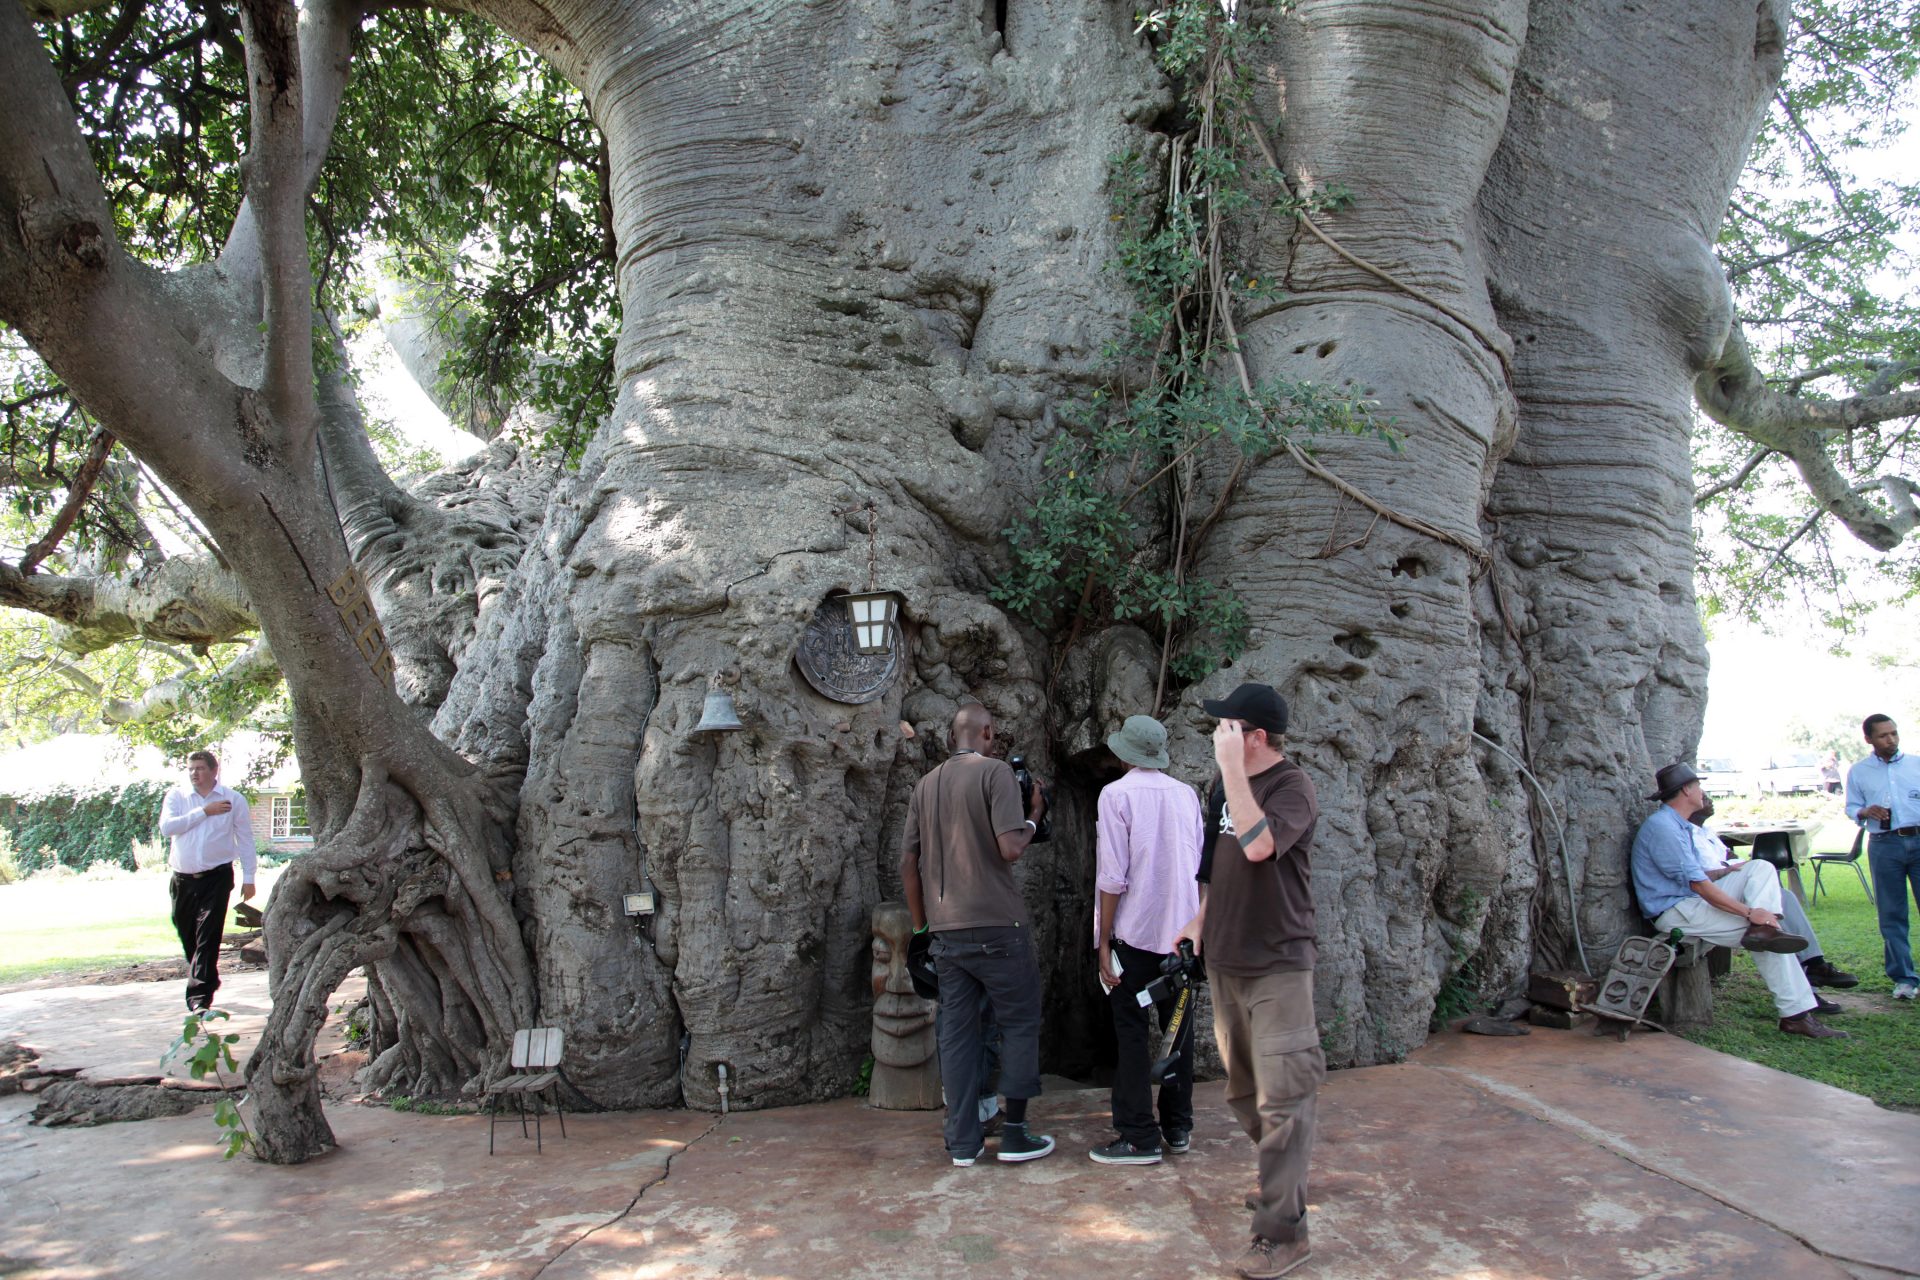 Sunland Baobab, South Africa - At least 1,100 years old (Died in 2016) 